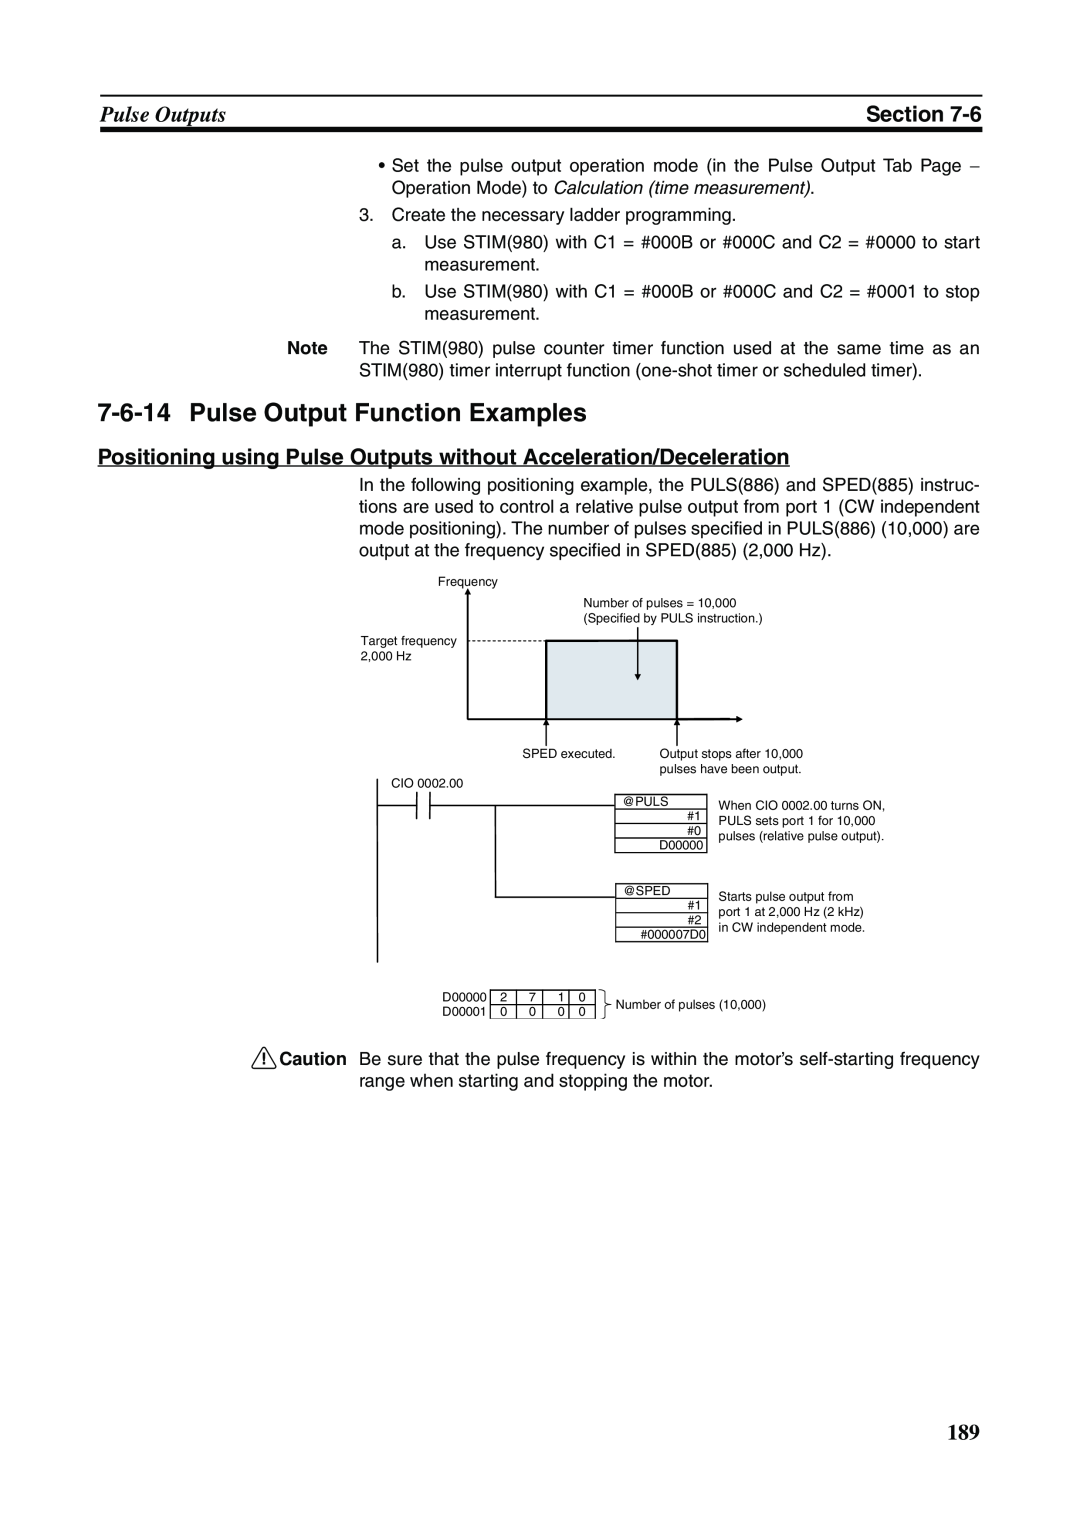 Omron FQM1-MMP21, FQM1-CM001, FQM1-MMA21 operation manual 7-6-14Pulse Output Function Examples, Pulse Outputs, Section 